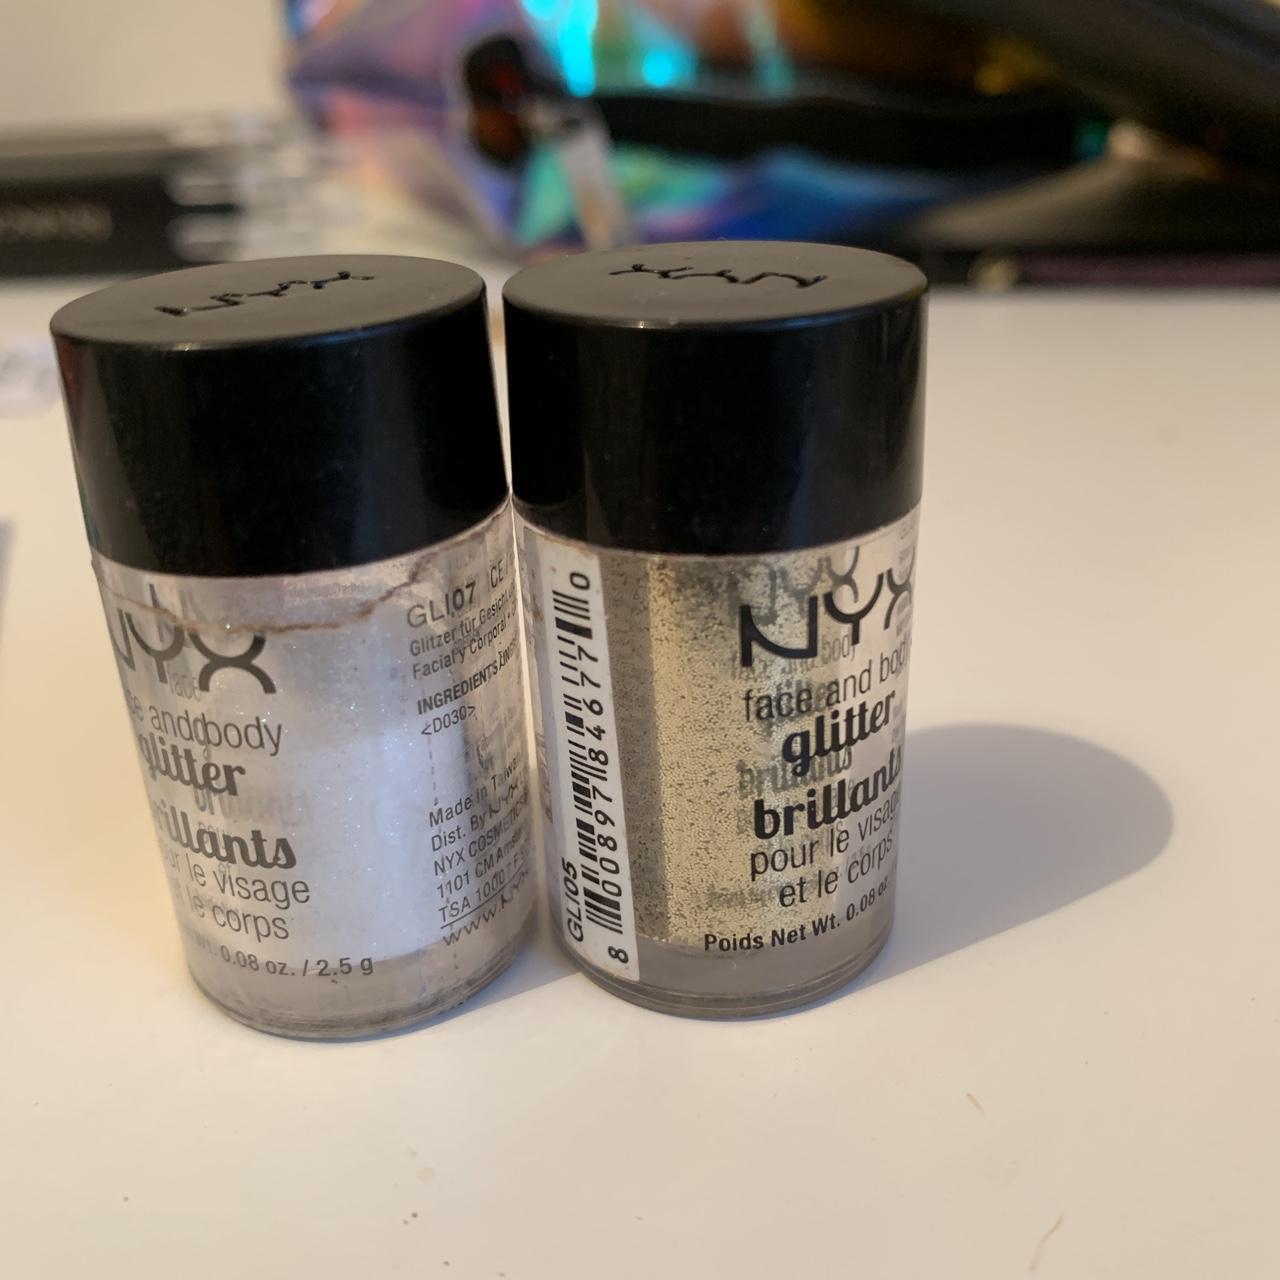 NYX Professional Makeup Red Face & Body Glitter Brillants, 2.5g